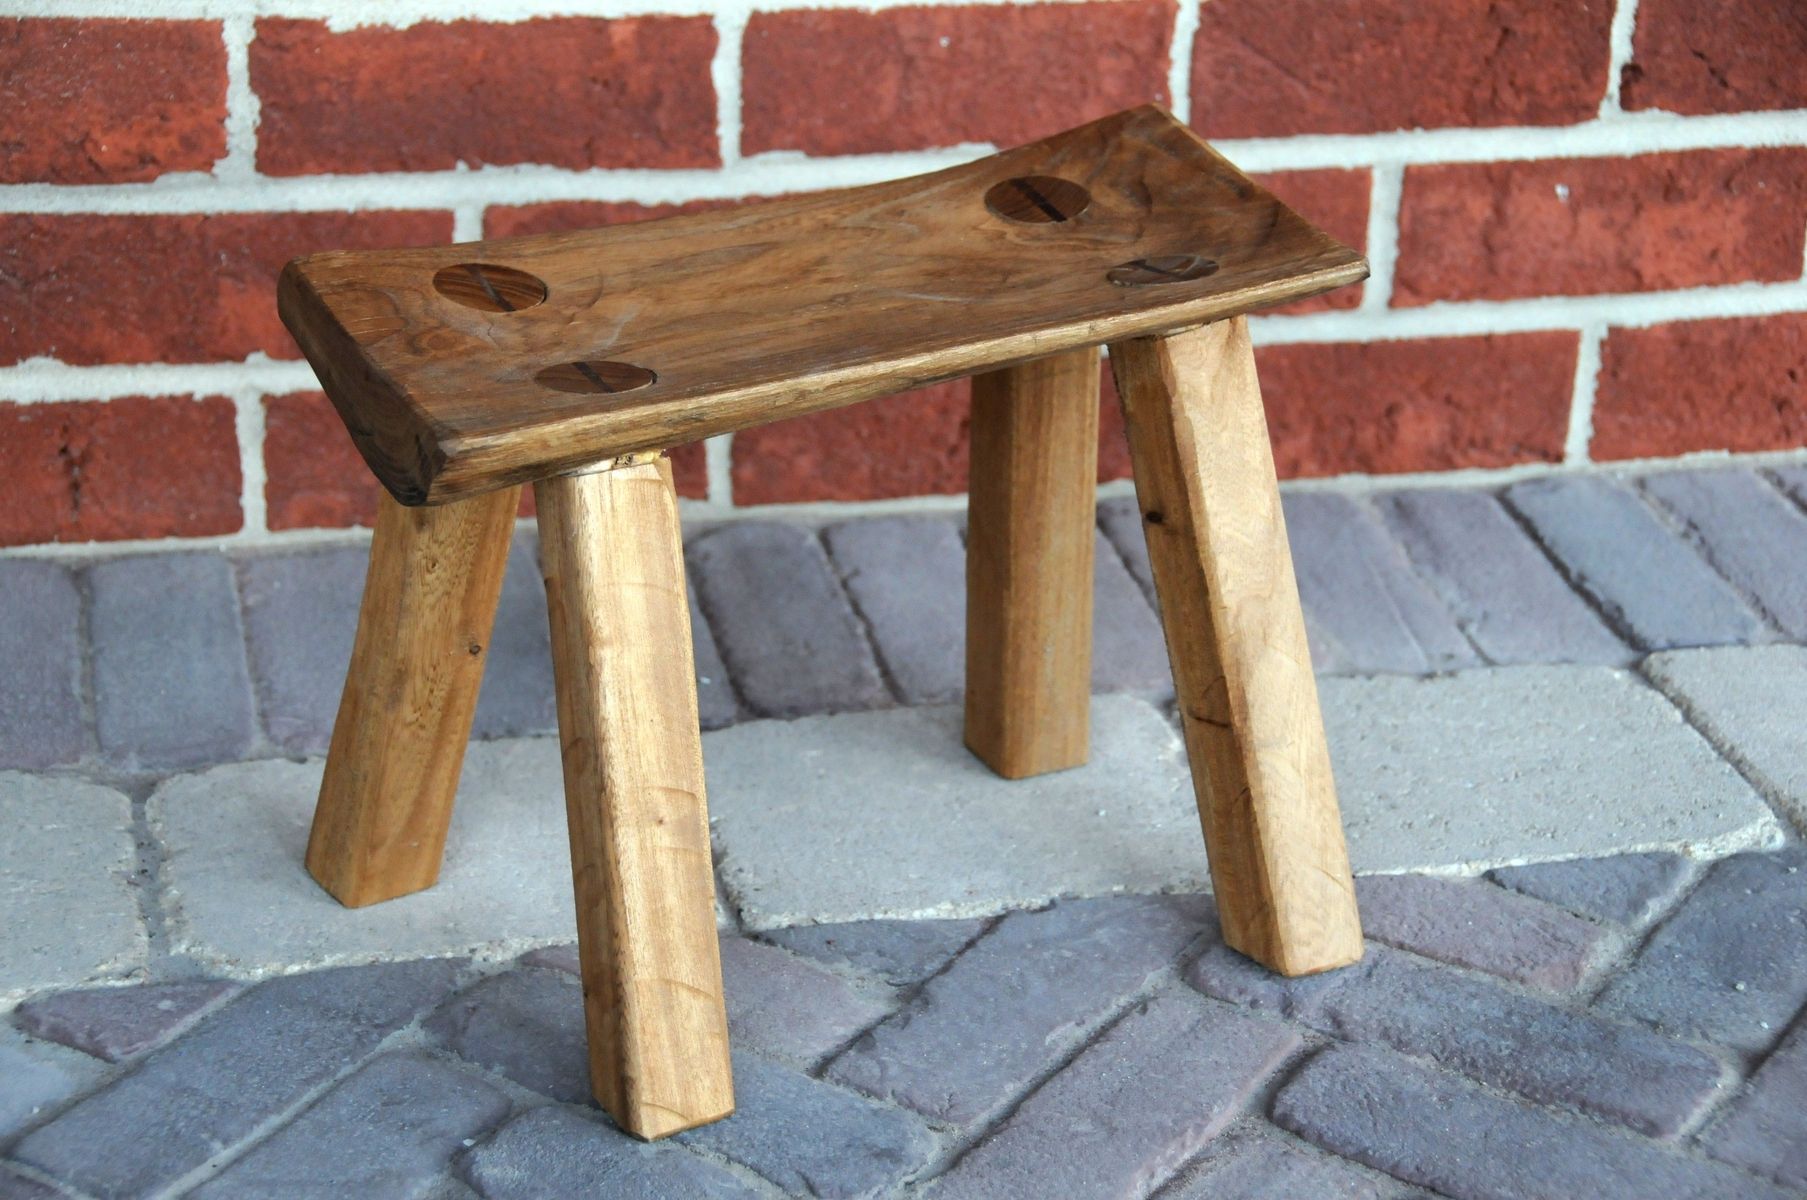 Handmade Reclaimed Wood Bench by The Chicago Bench Co. | CustomMade.com